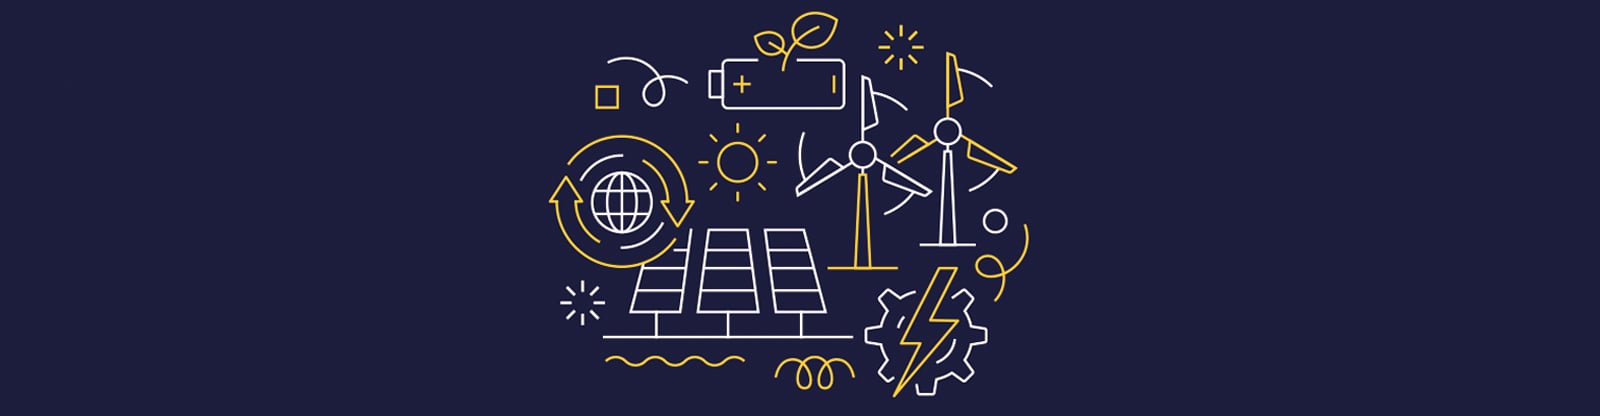 White and yellow icons symbolizing clean energy